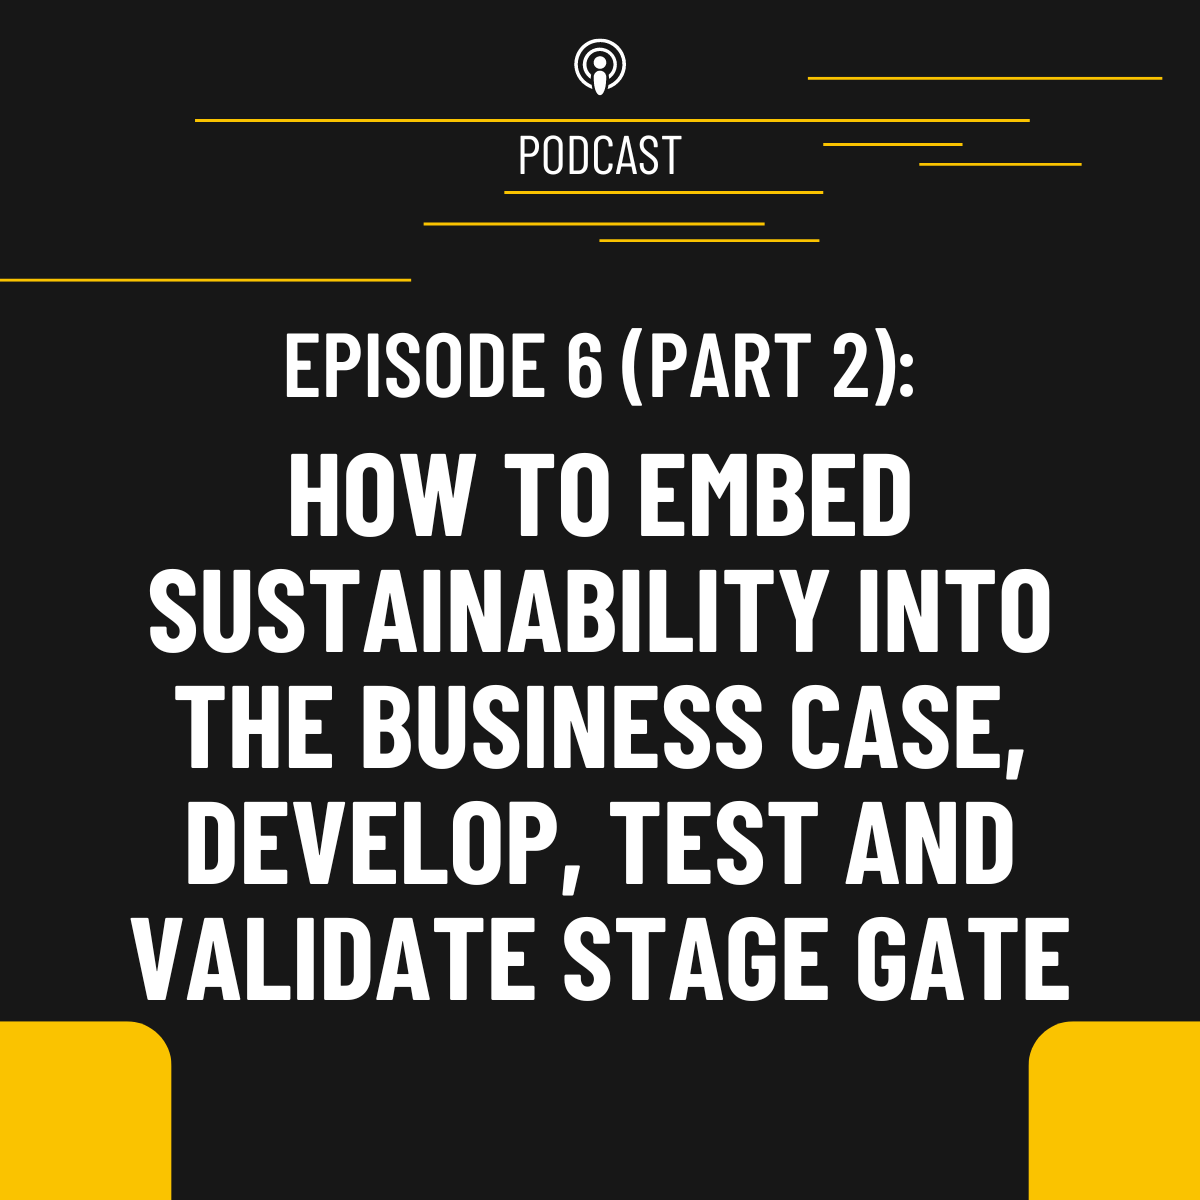 Episode 6, part 2: How to embed sustainability into the business case, develop, test & validate stage gate